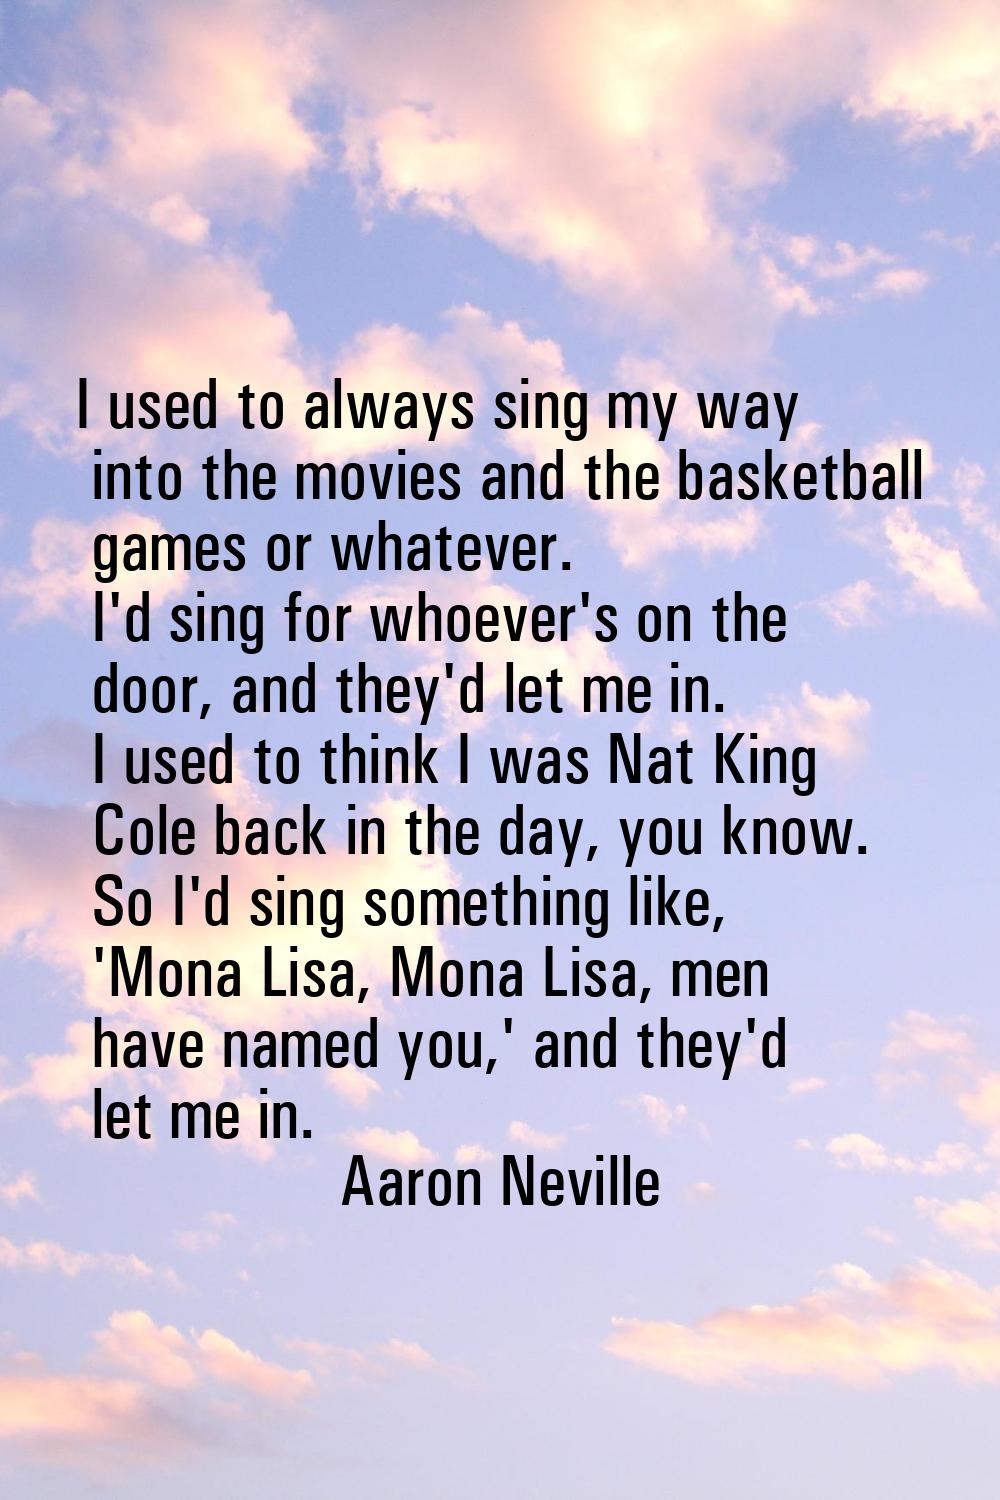 I used to always sing my way into the movies and the basketball games or whatever. I'd sing for who